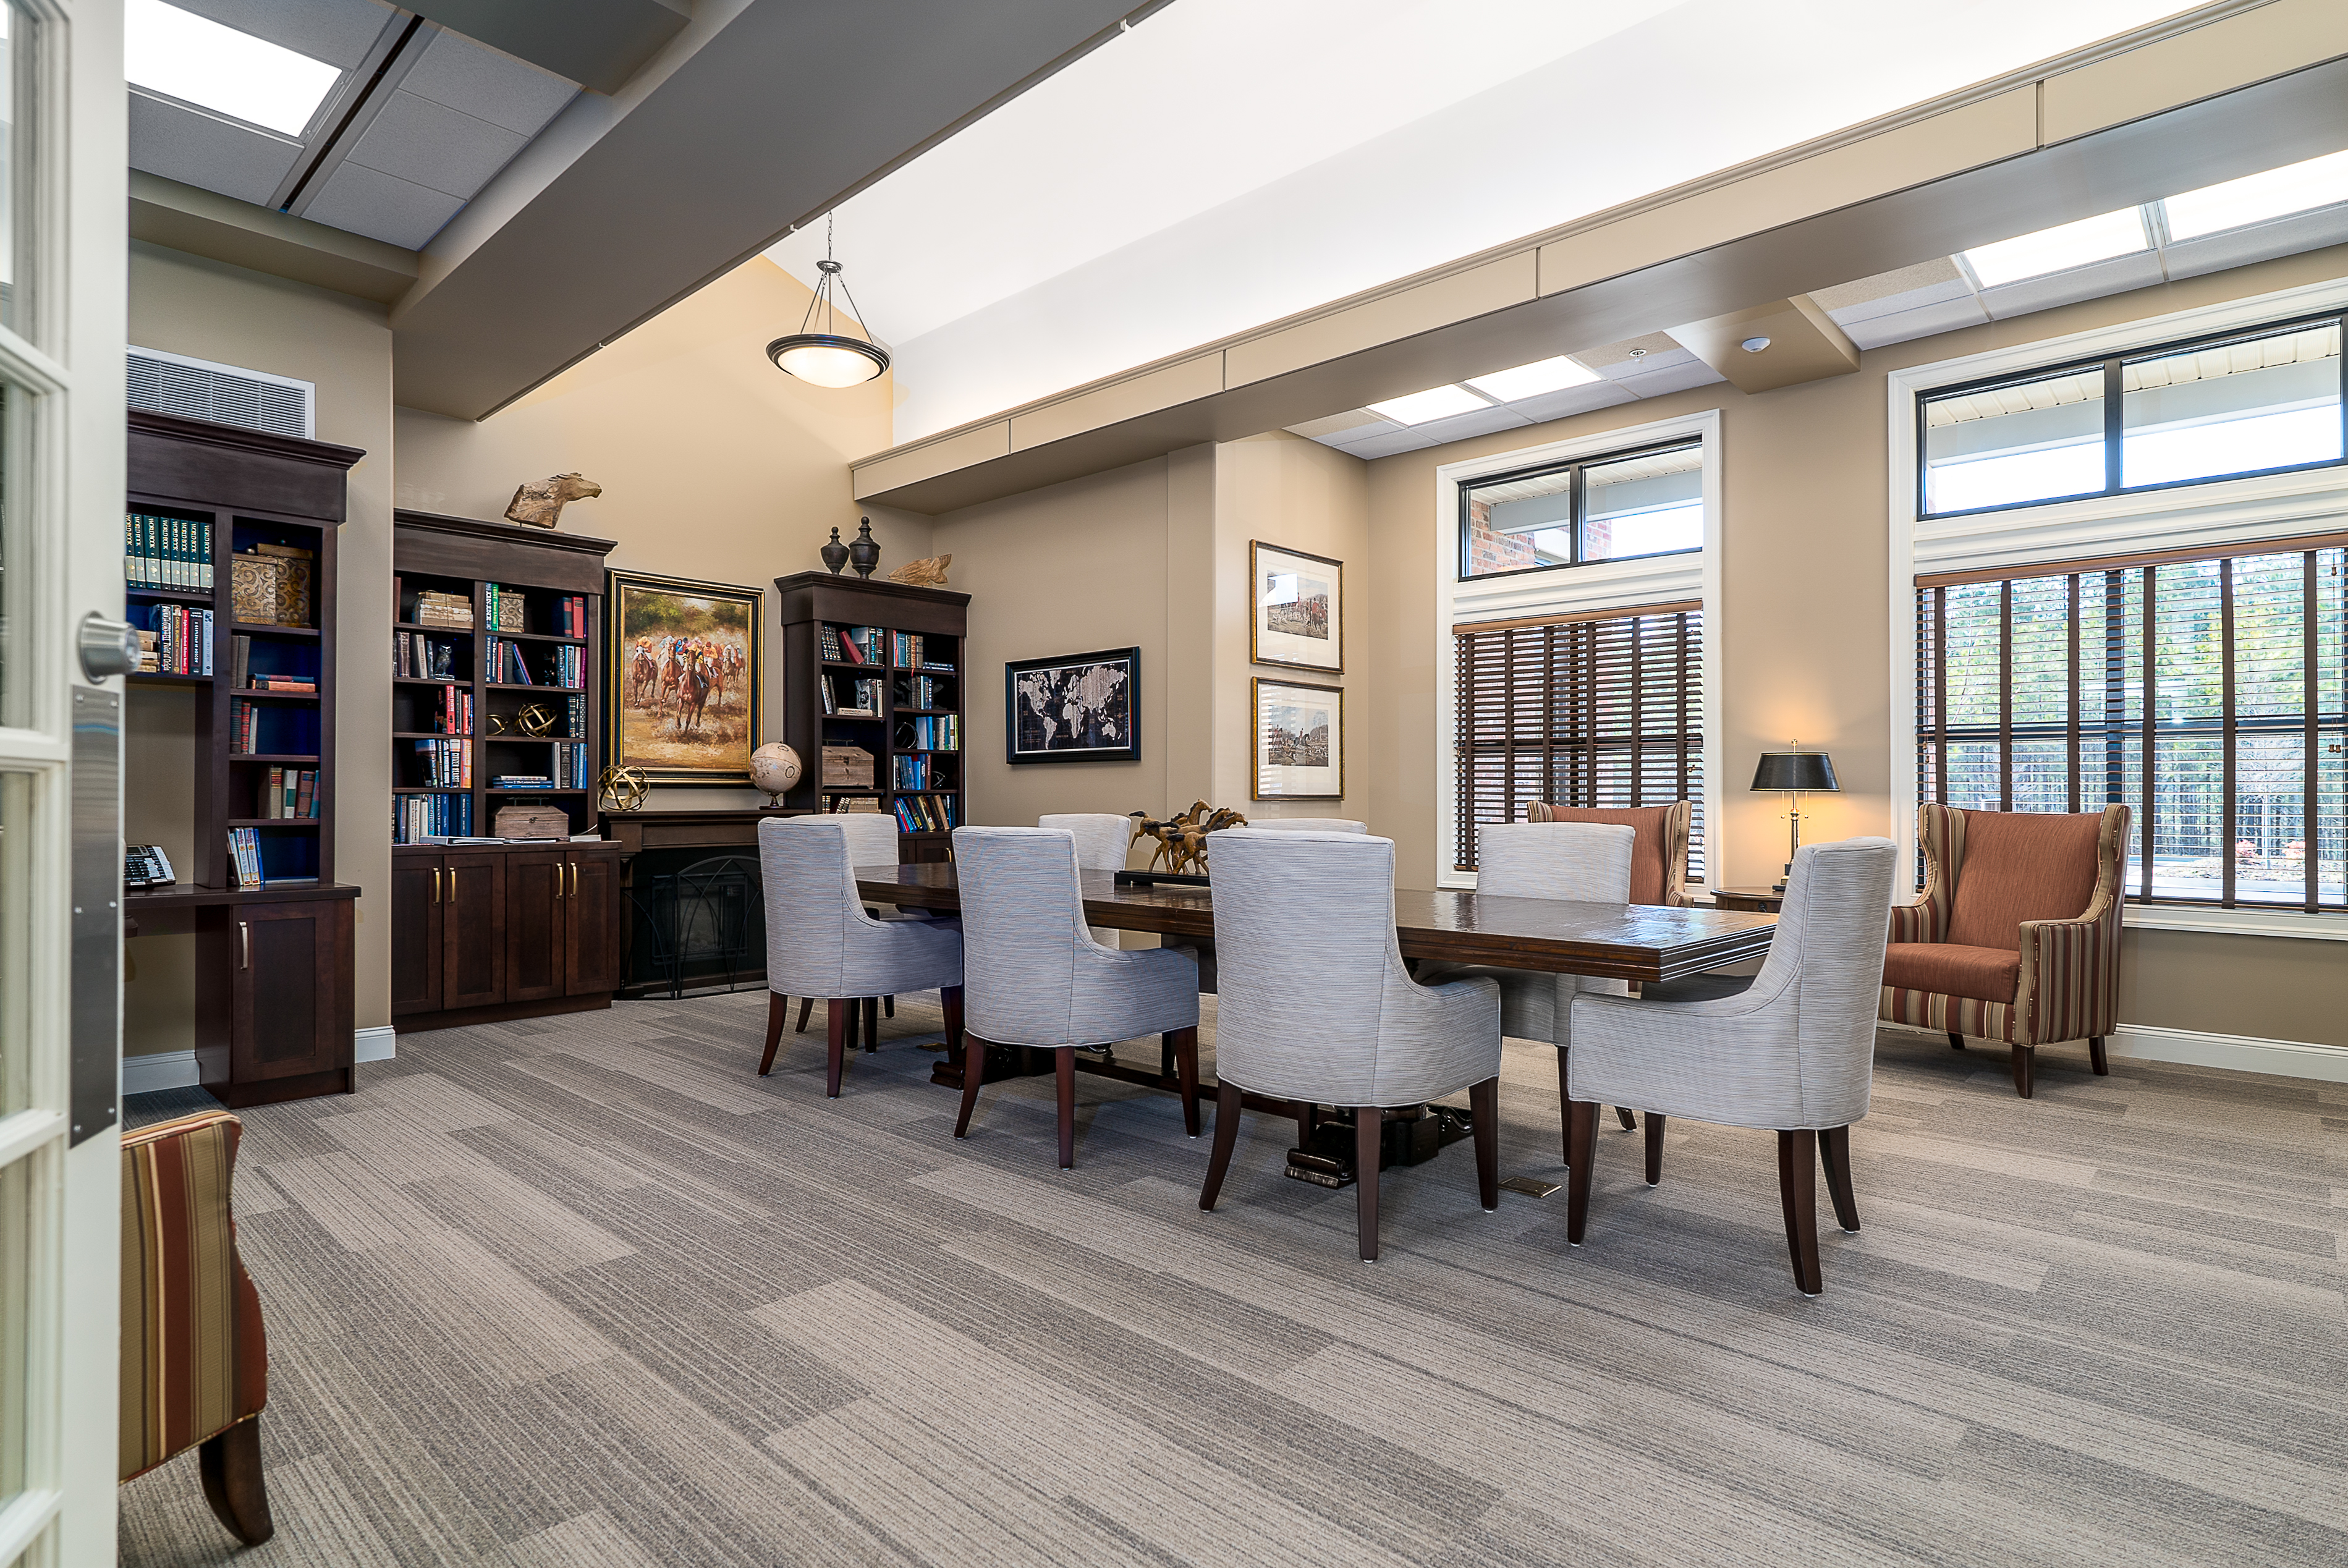 Interface Shiver Me Timbers plank carpet tile in senior housing library